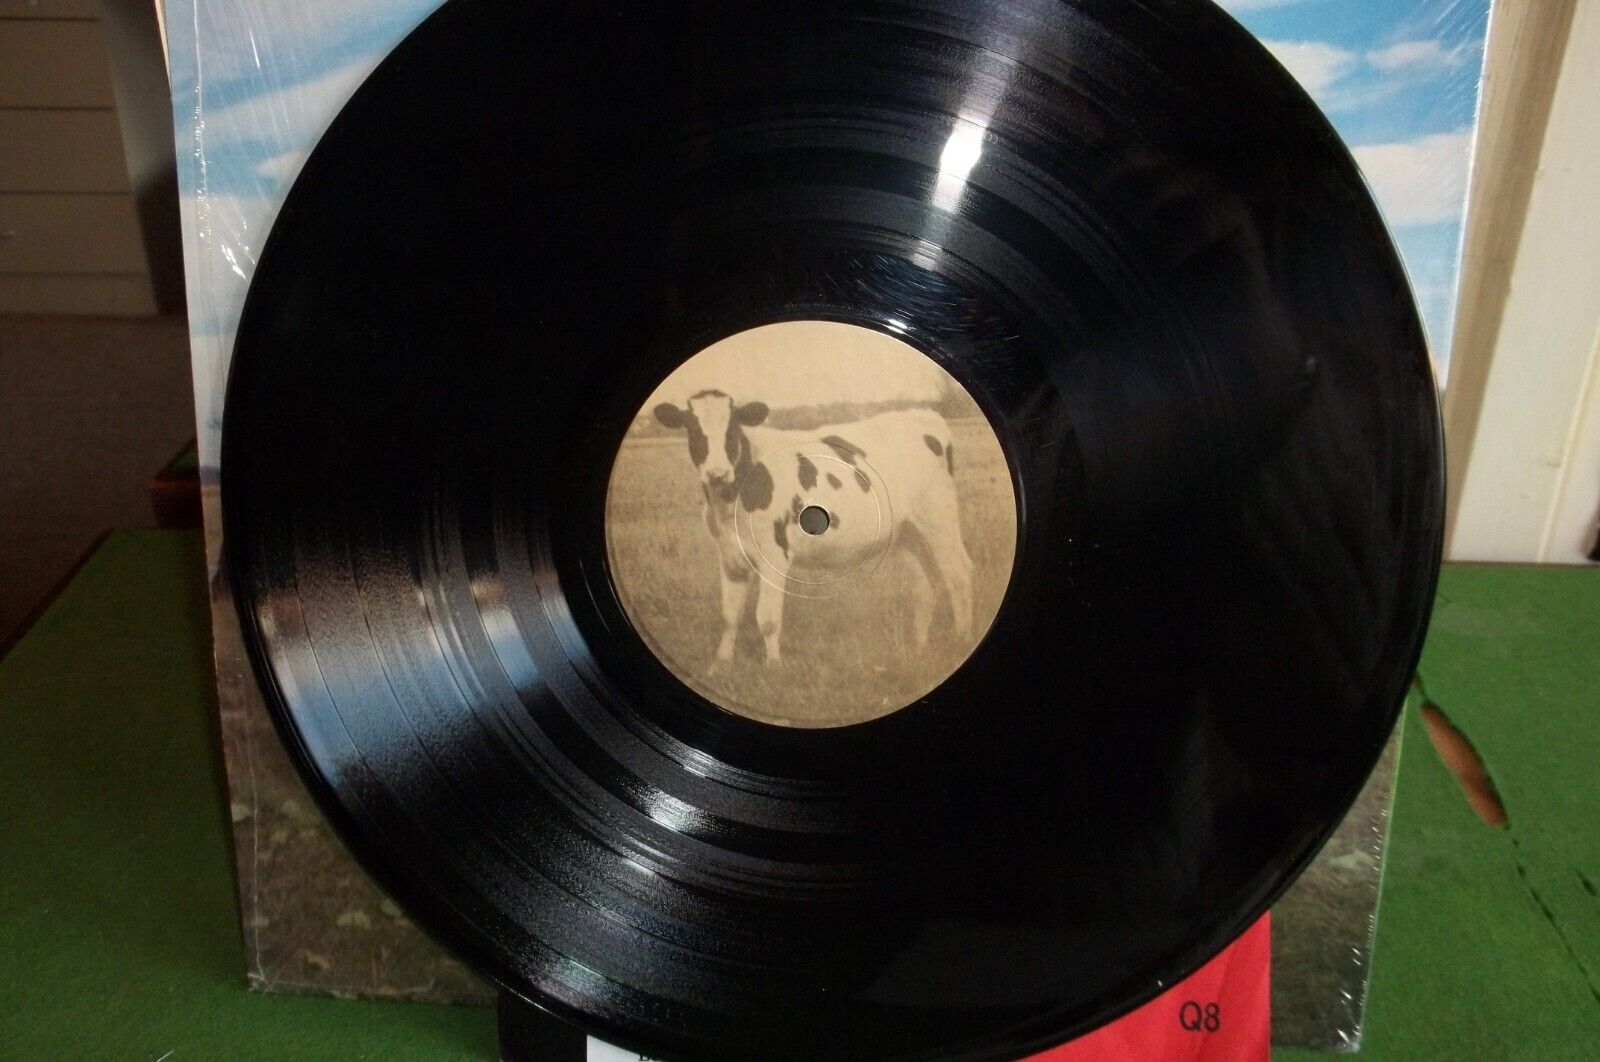 Pic 3 PINK FLOYD LP "DARK SIDE OF THE MOO" TRIXIE CUD-382  EX/EX  THE SCREAMING ABDABS